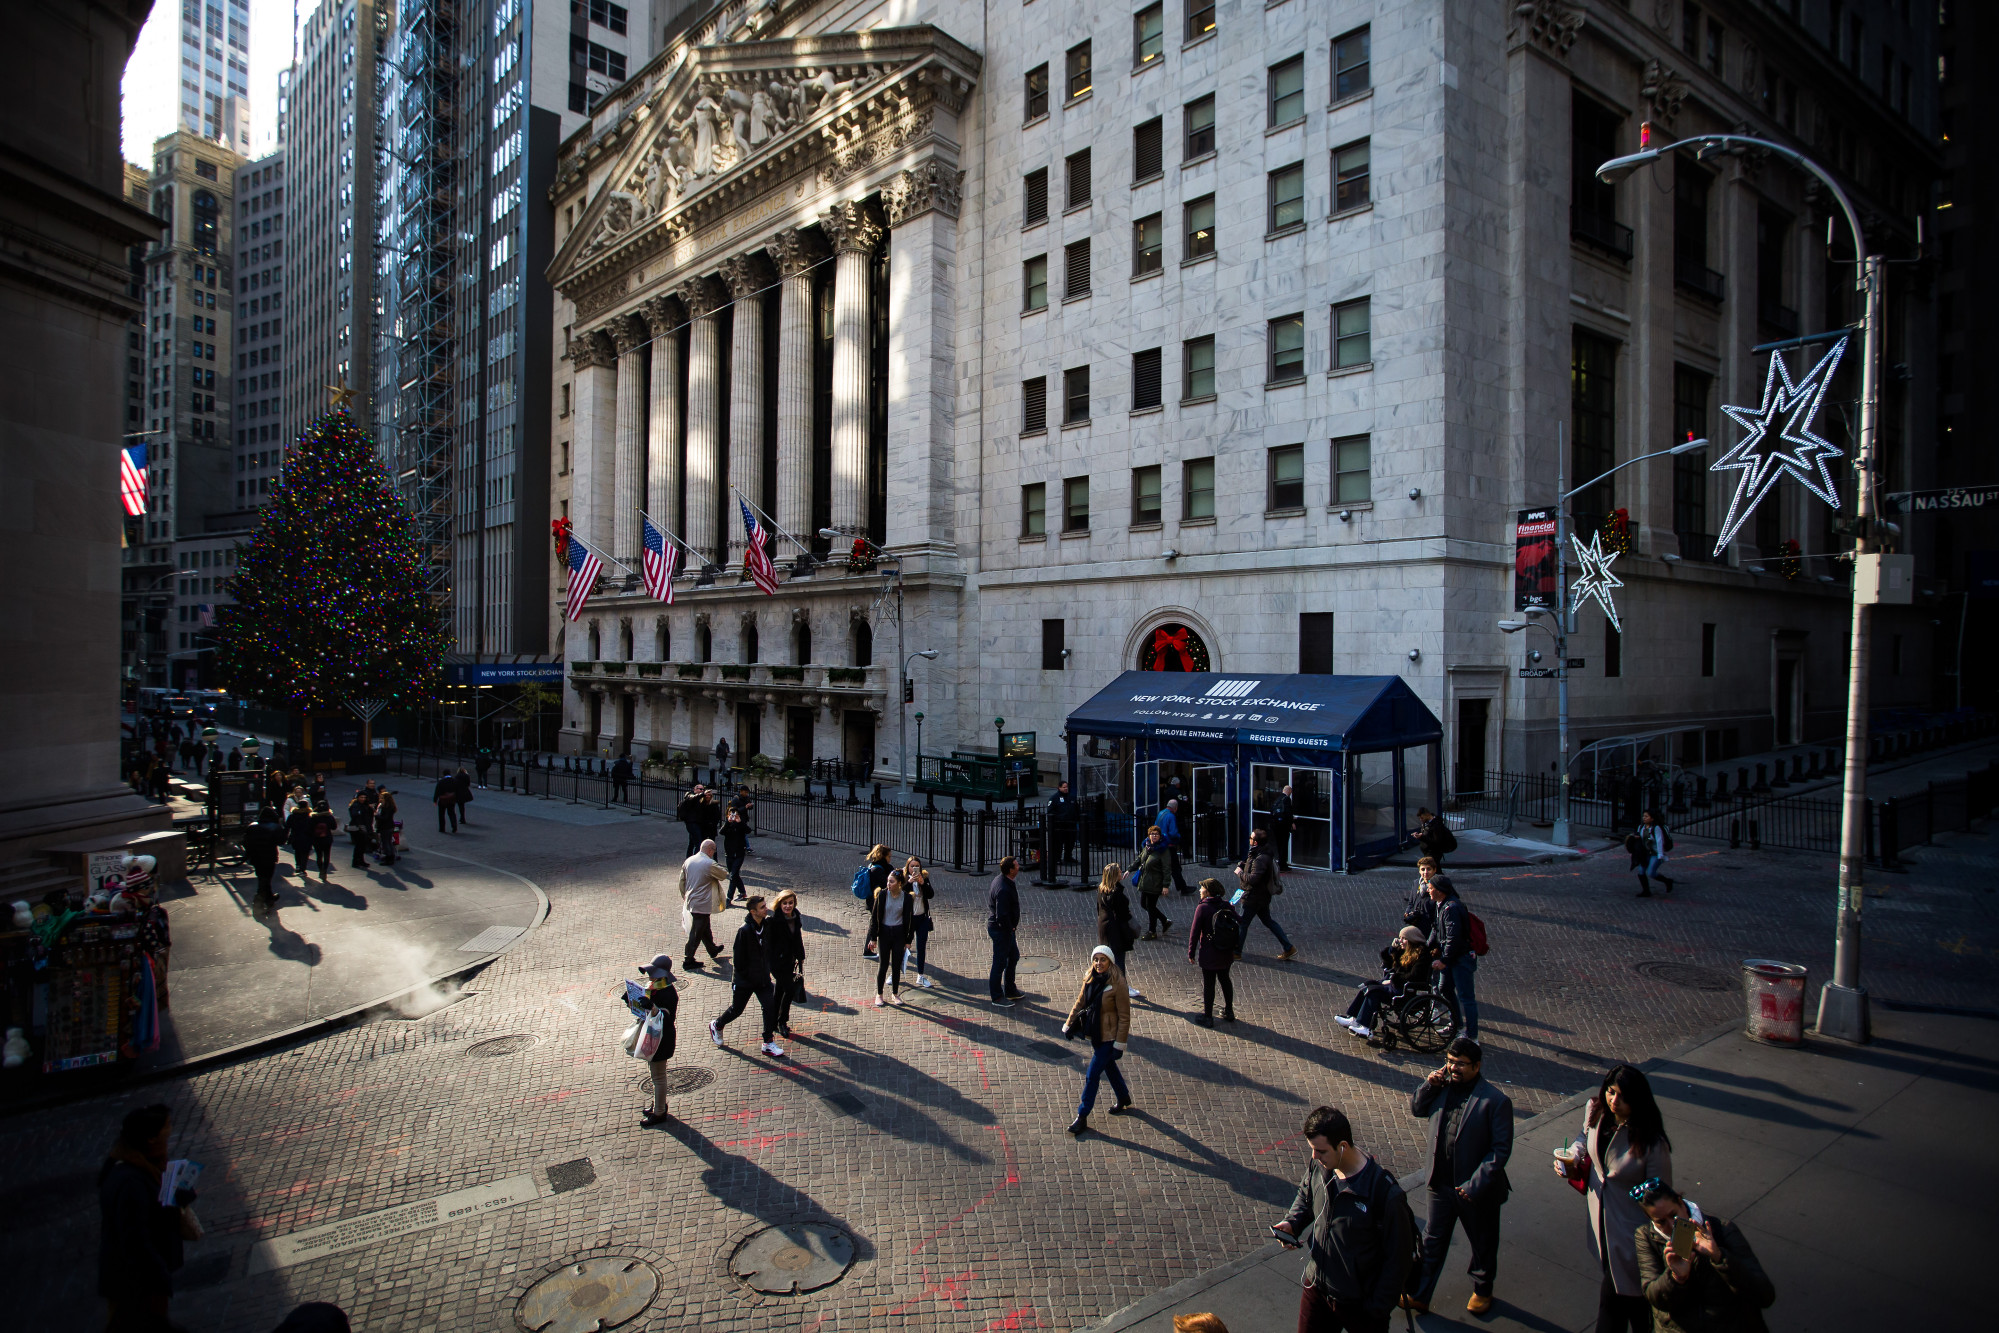 Pedestrians pass in front of the New York Stock Exchange (NYSE) in New York, U.S., on Friday, Dec. 1, 2017.